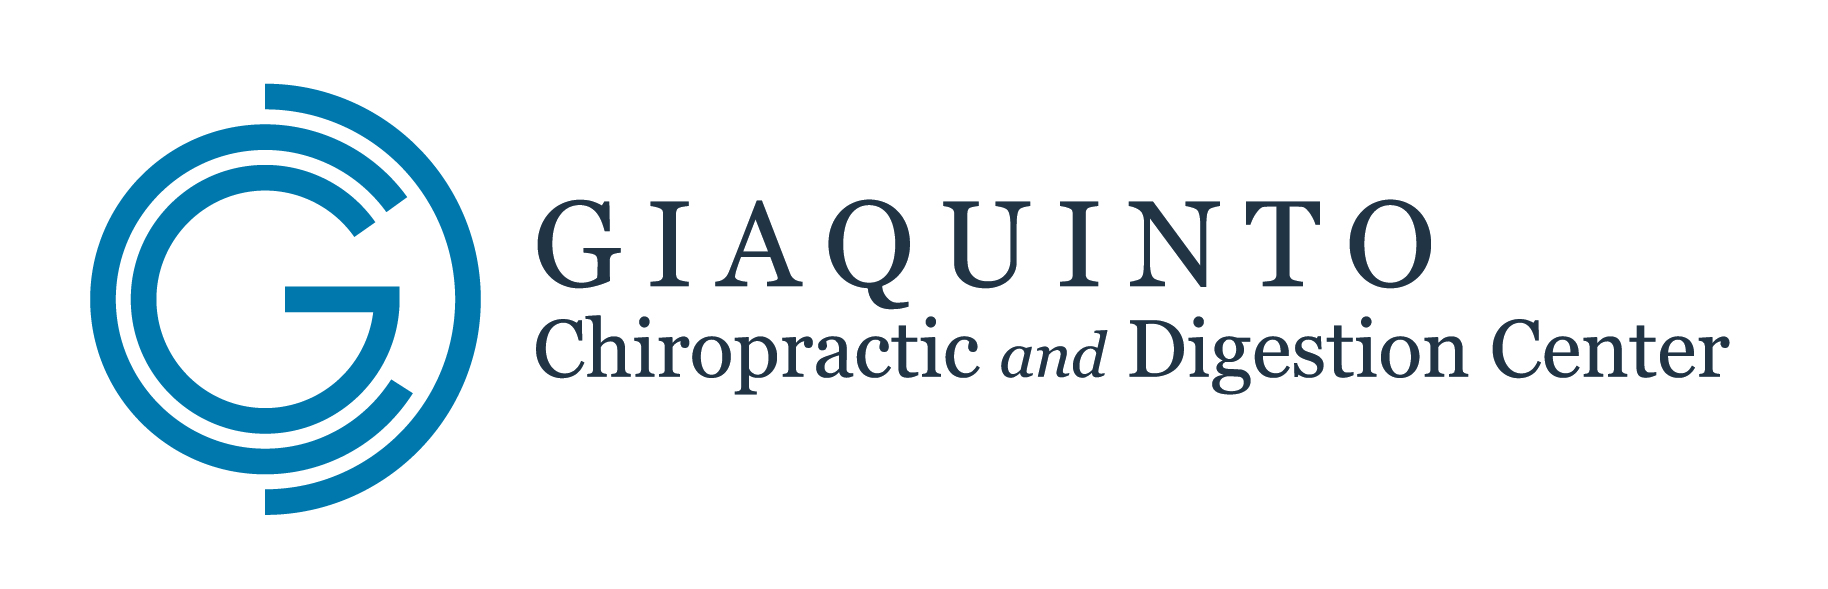 Giaquinto Chiropractic and Digestion Center